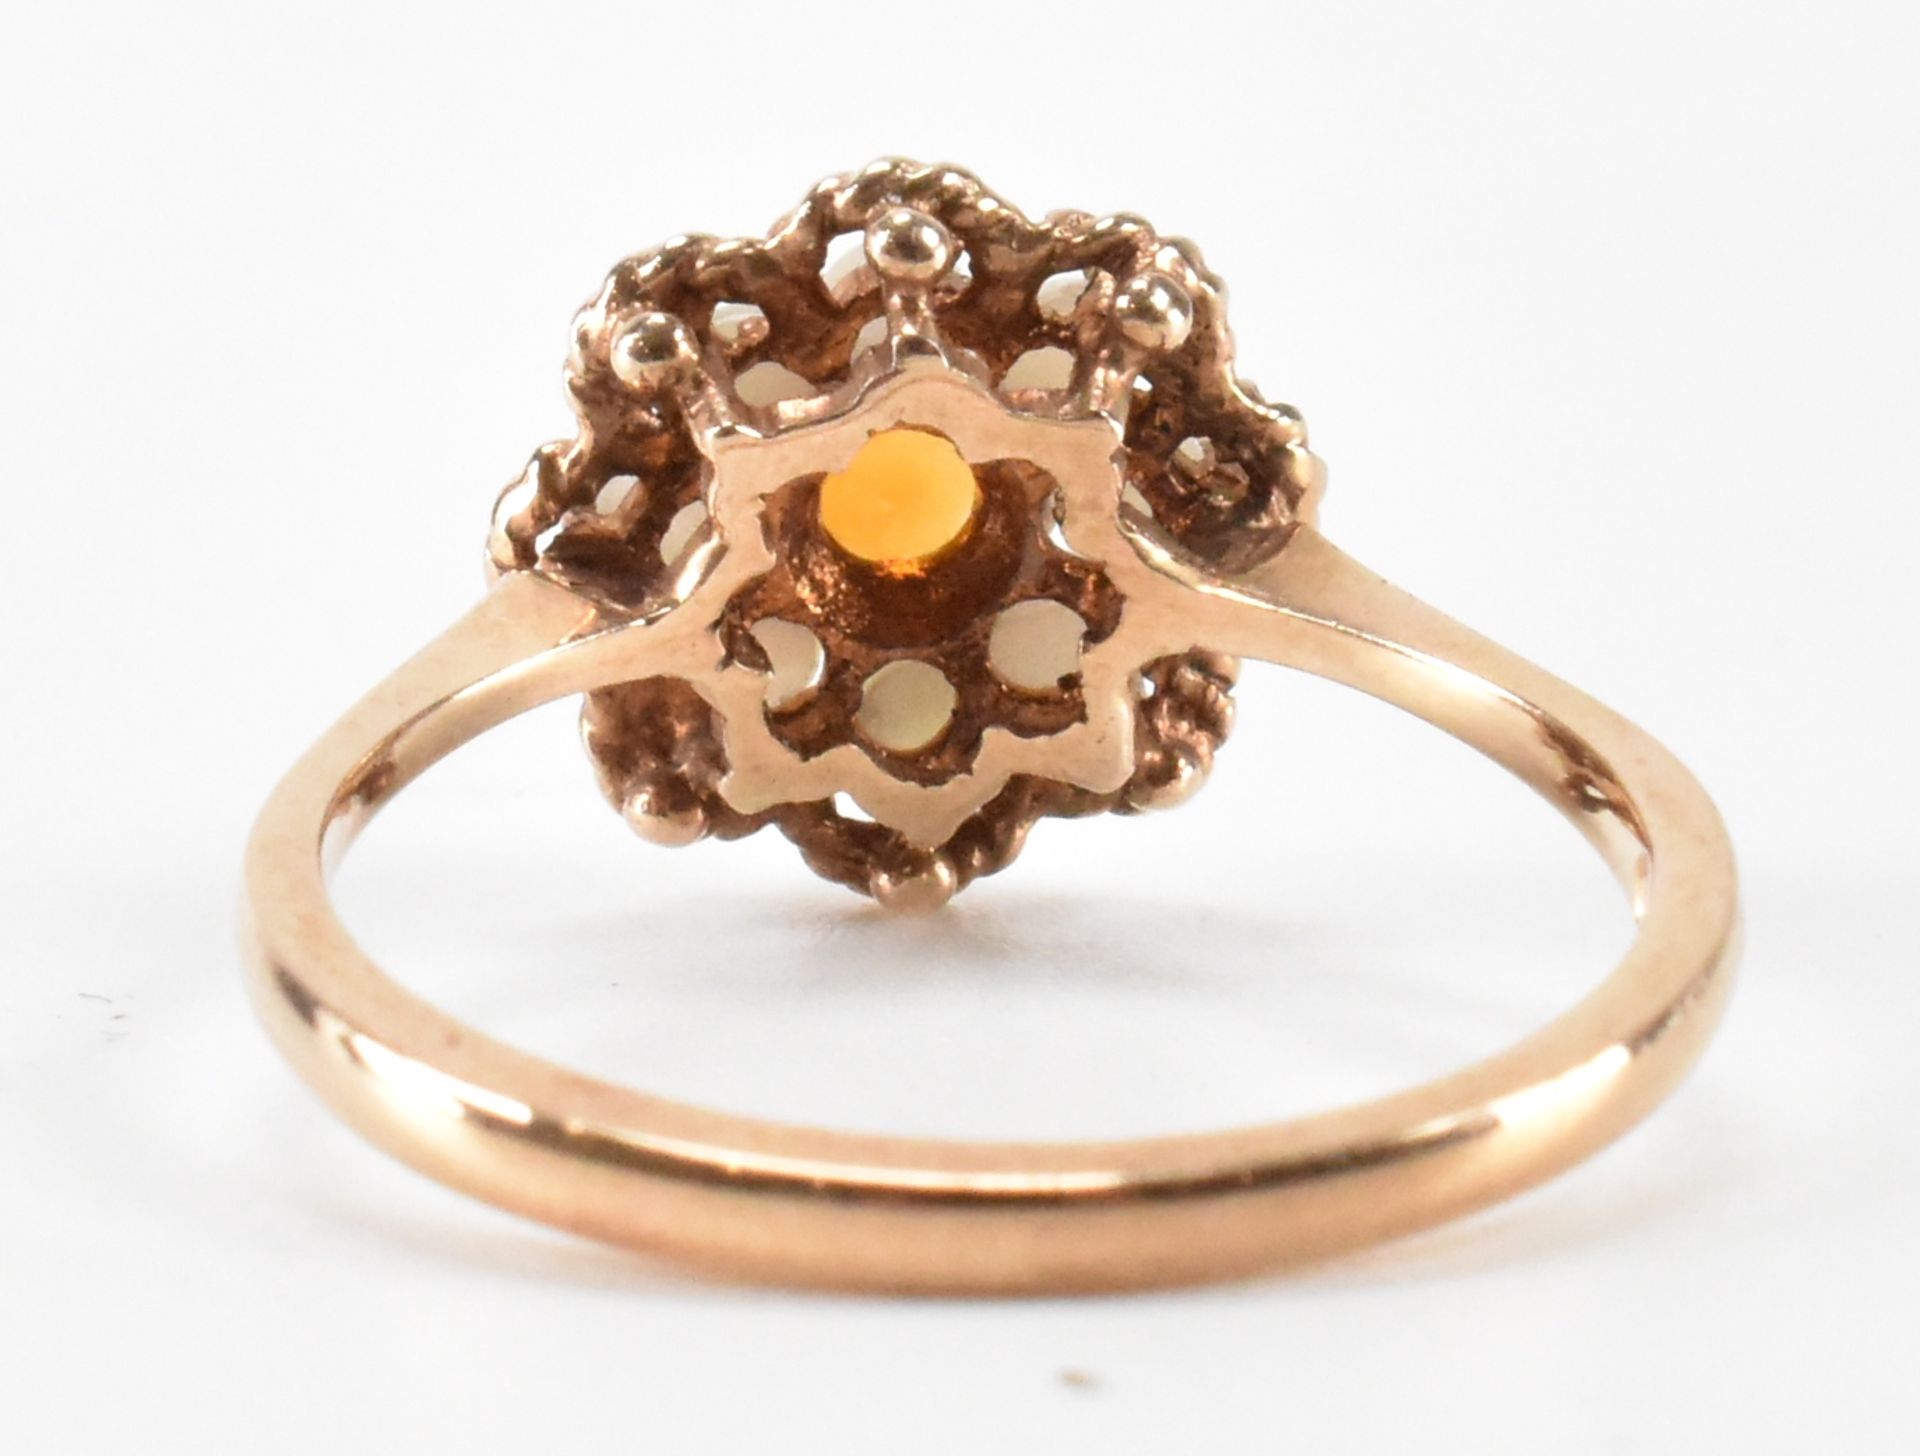 HALLMARKED 9CT GOLD CITRINE & HALF PEARL CLUSTER RING - Image 3 of 5